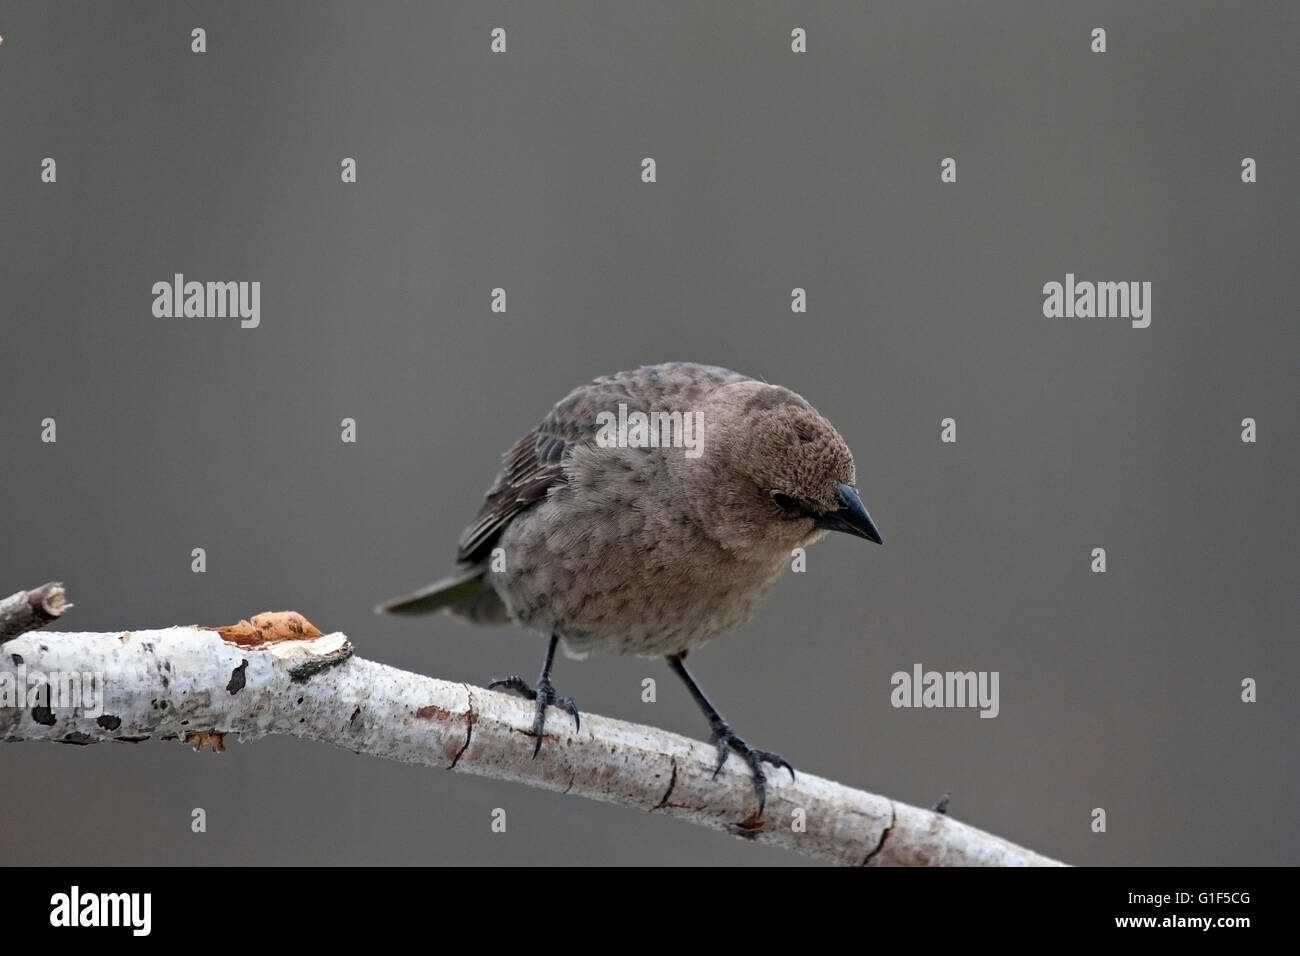 Female cowbird looks on curiously from her birch branch perch Stock Photo